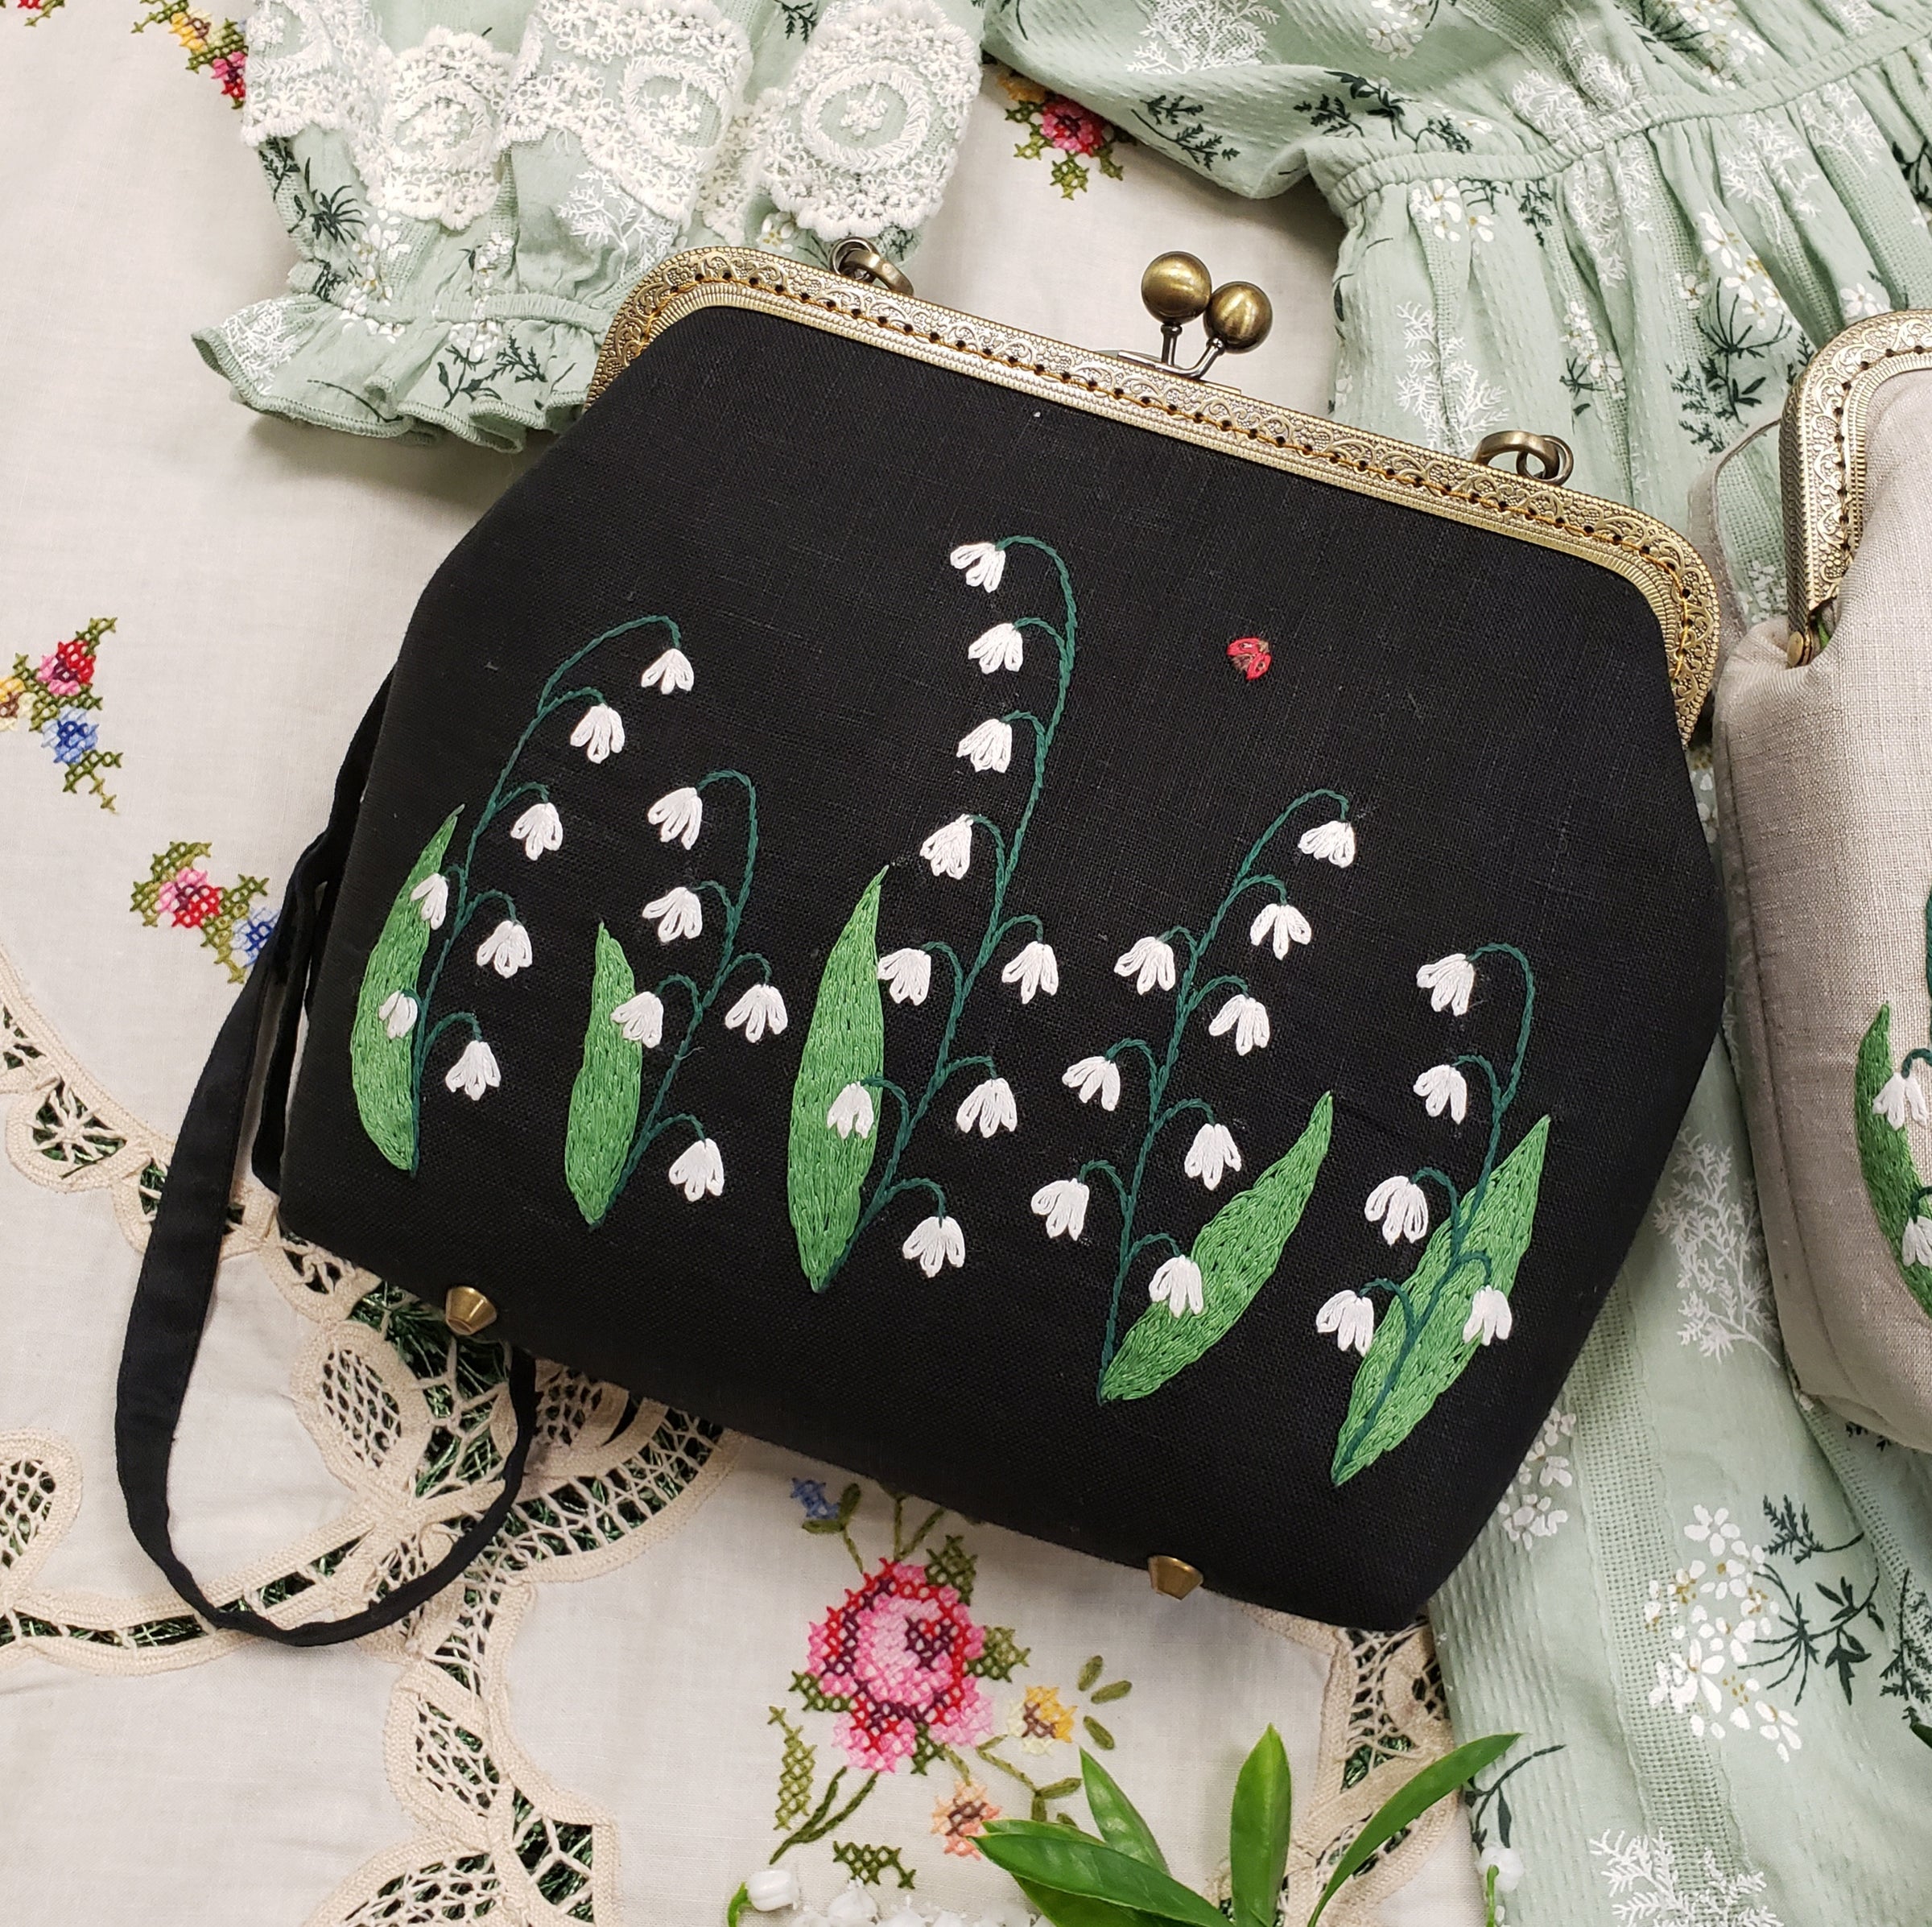 Handmade mexican cross body bag | Unique items products, Bags, Handmade